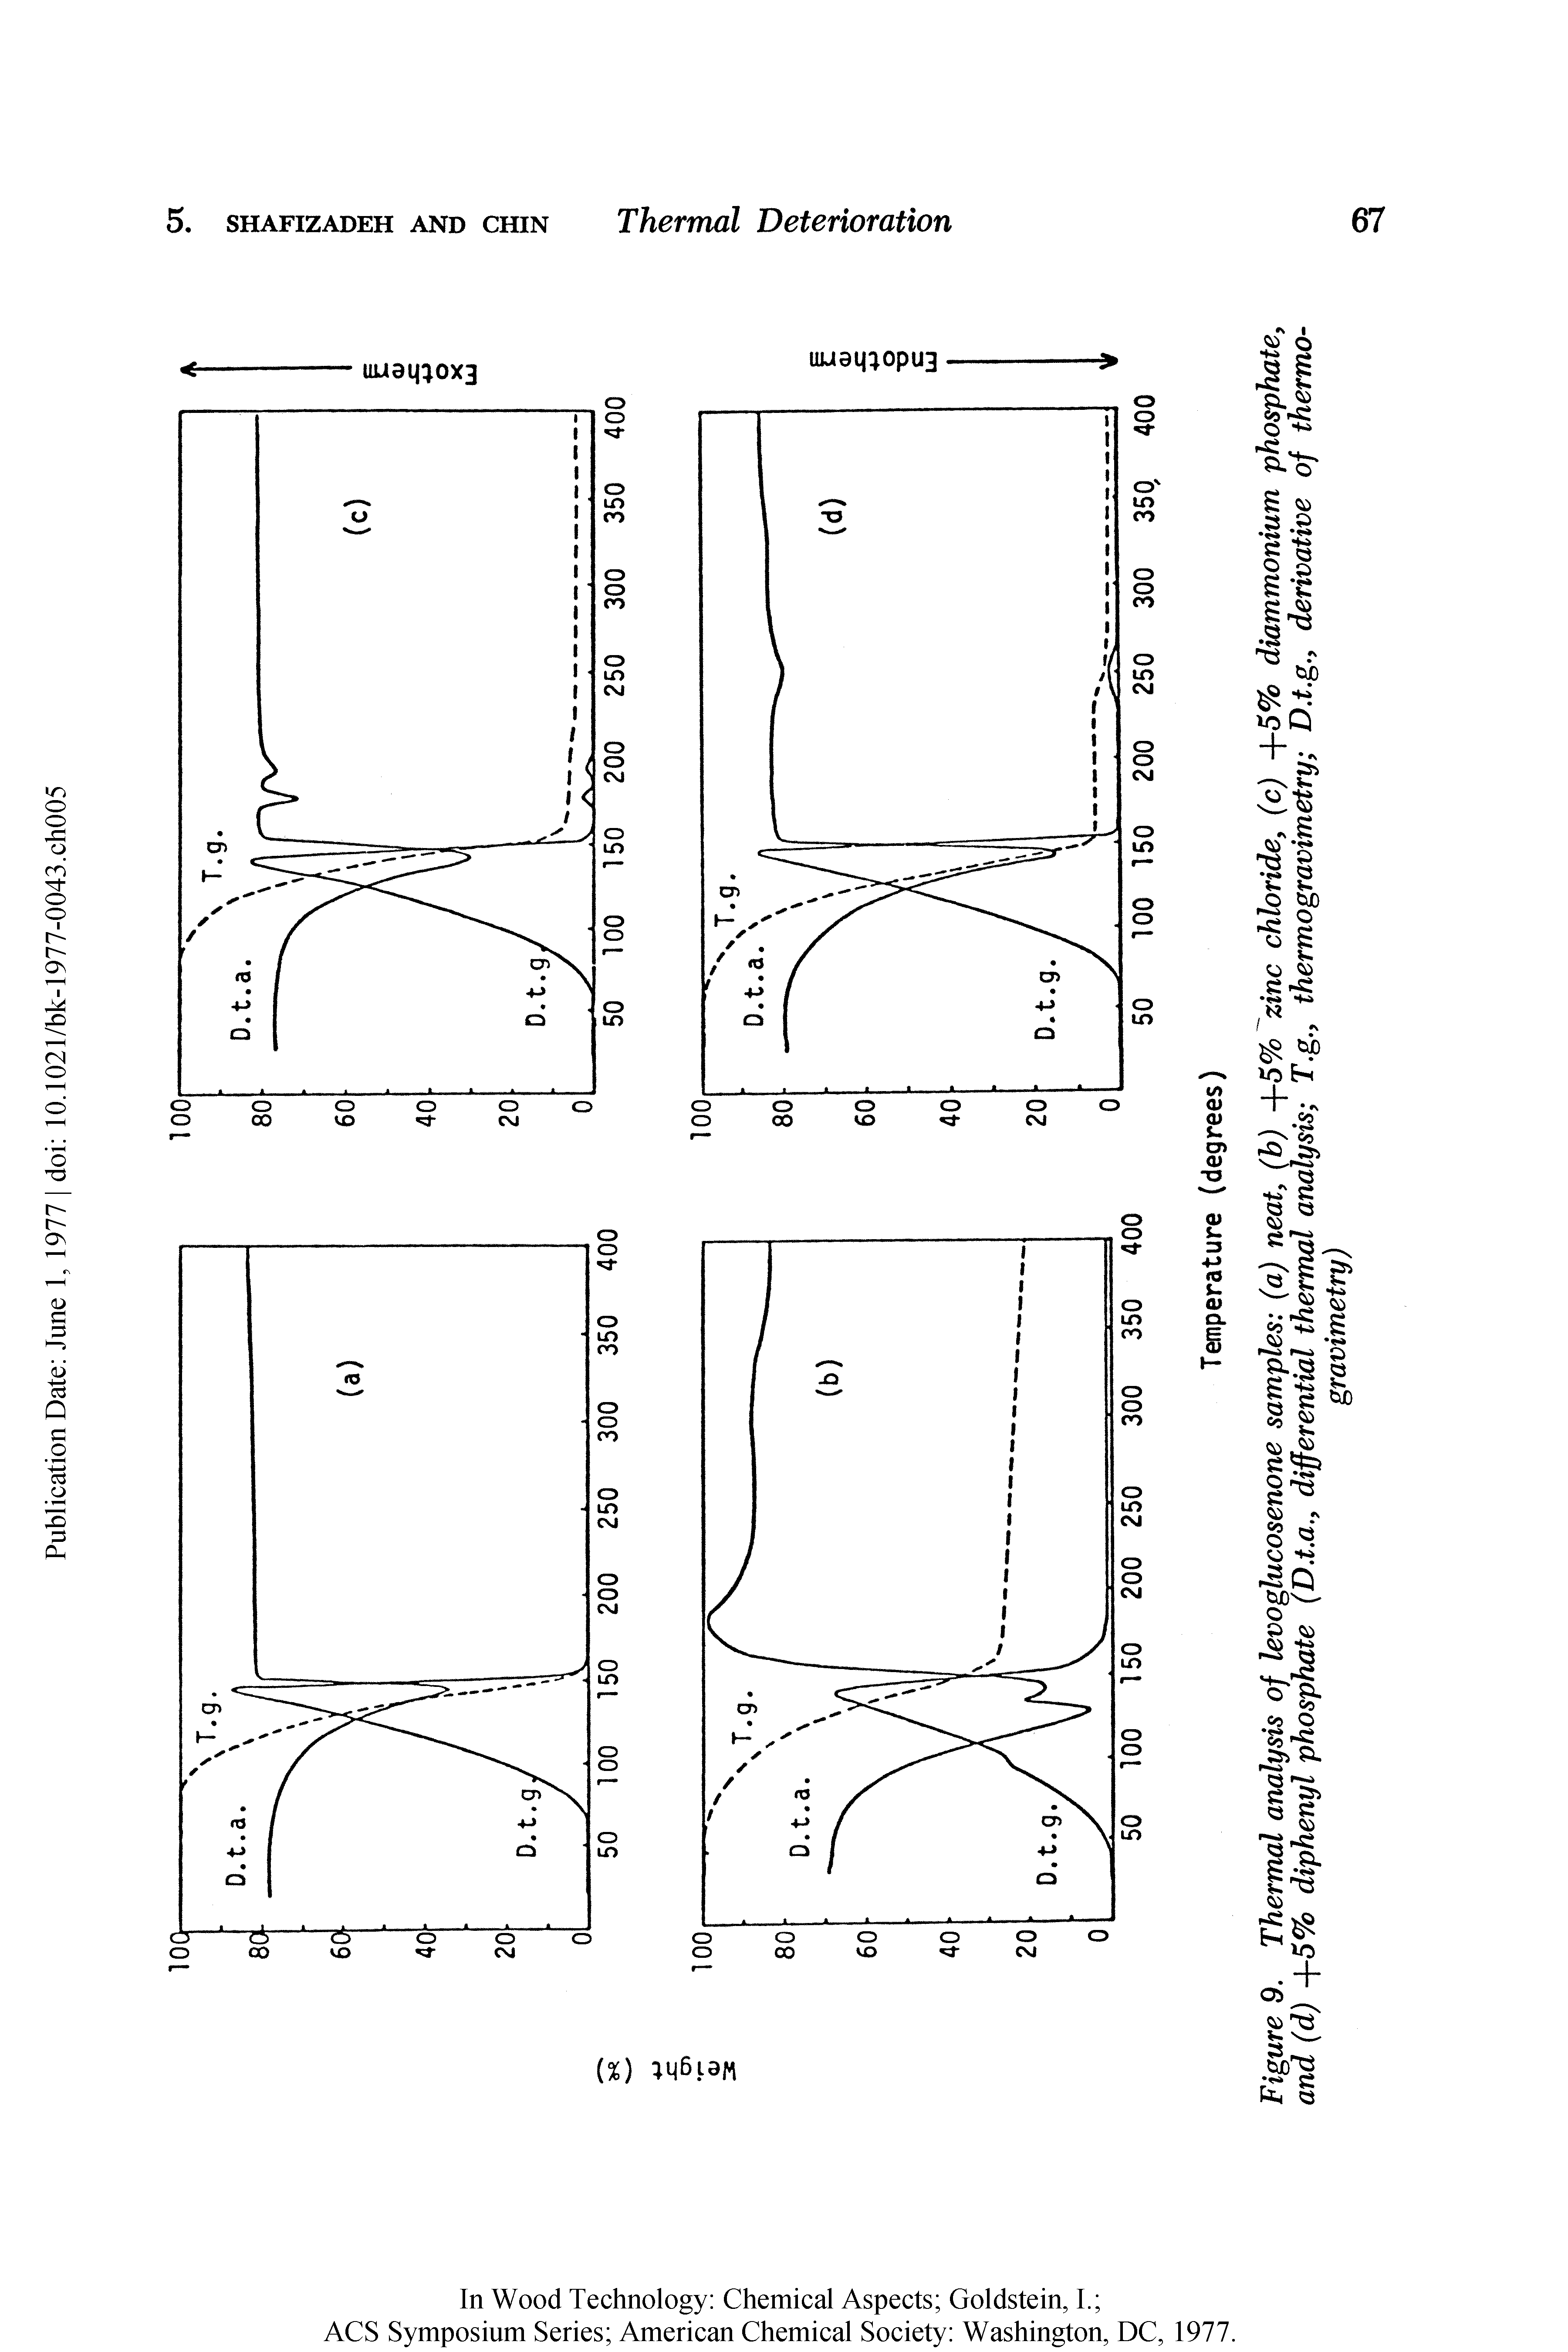 Figure 9. Thermal analysis of levoglucosenone samples (a) neat, (b) +5% zinc chloride, (c) +5% diammonium phosphate, and (d) +5% diphenyl phosphate (D.t.a., differential thermal analysis T.g., thermo gravimetry D.t.g., derivative of thermogravimetry)...